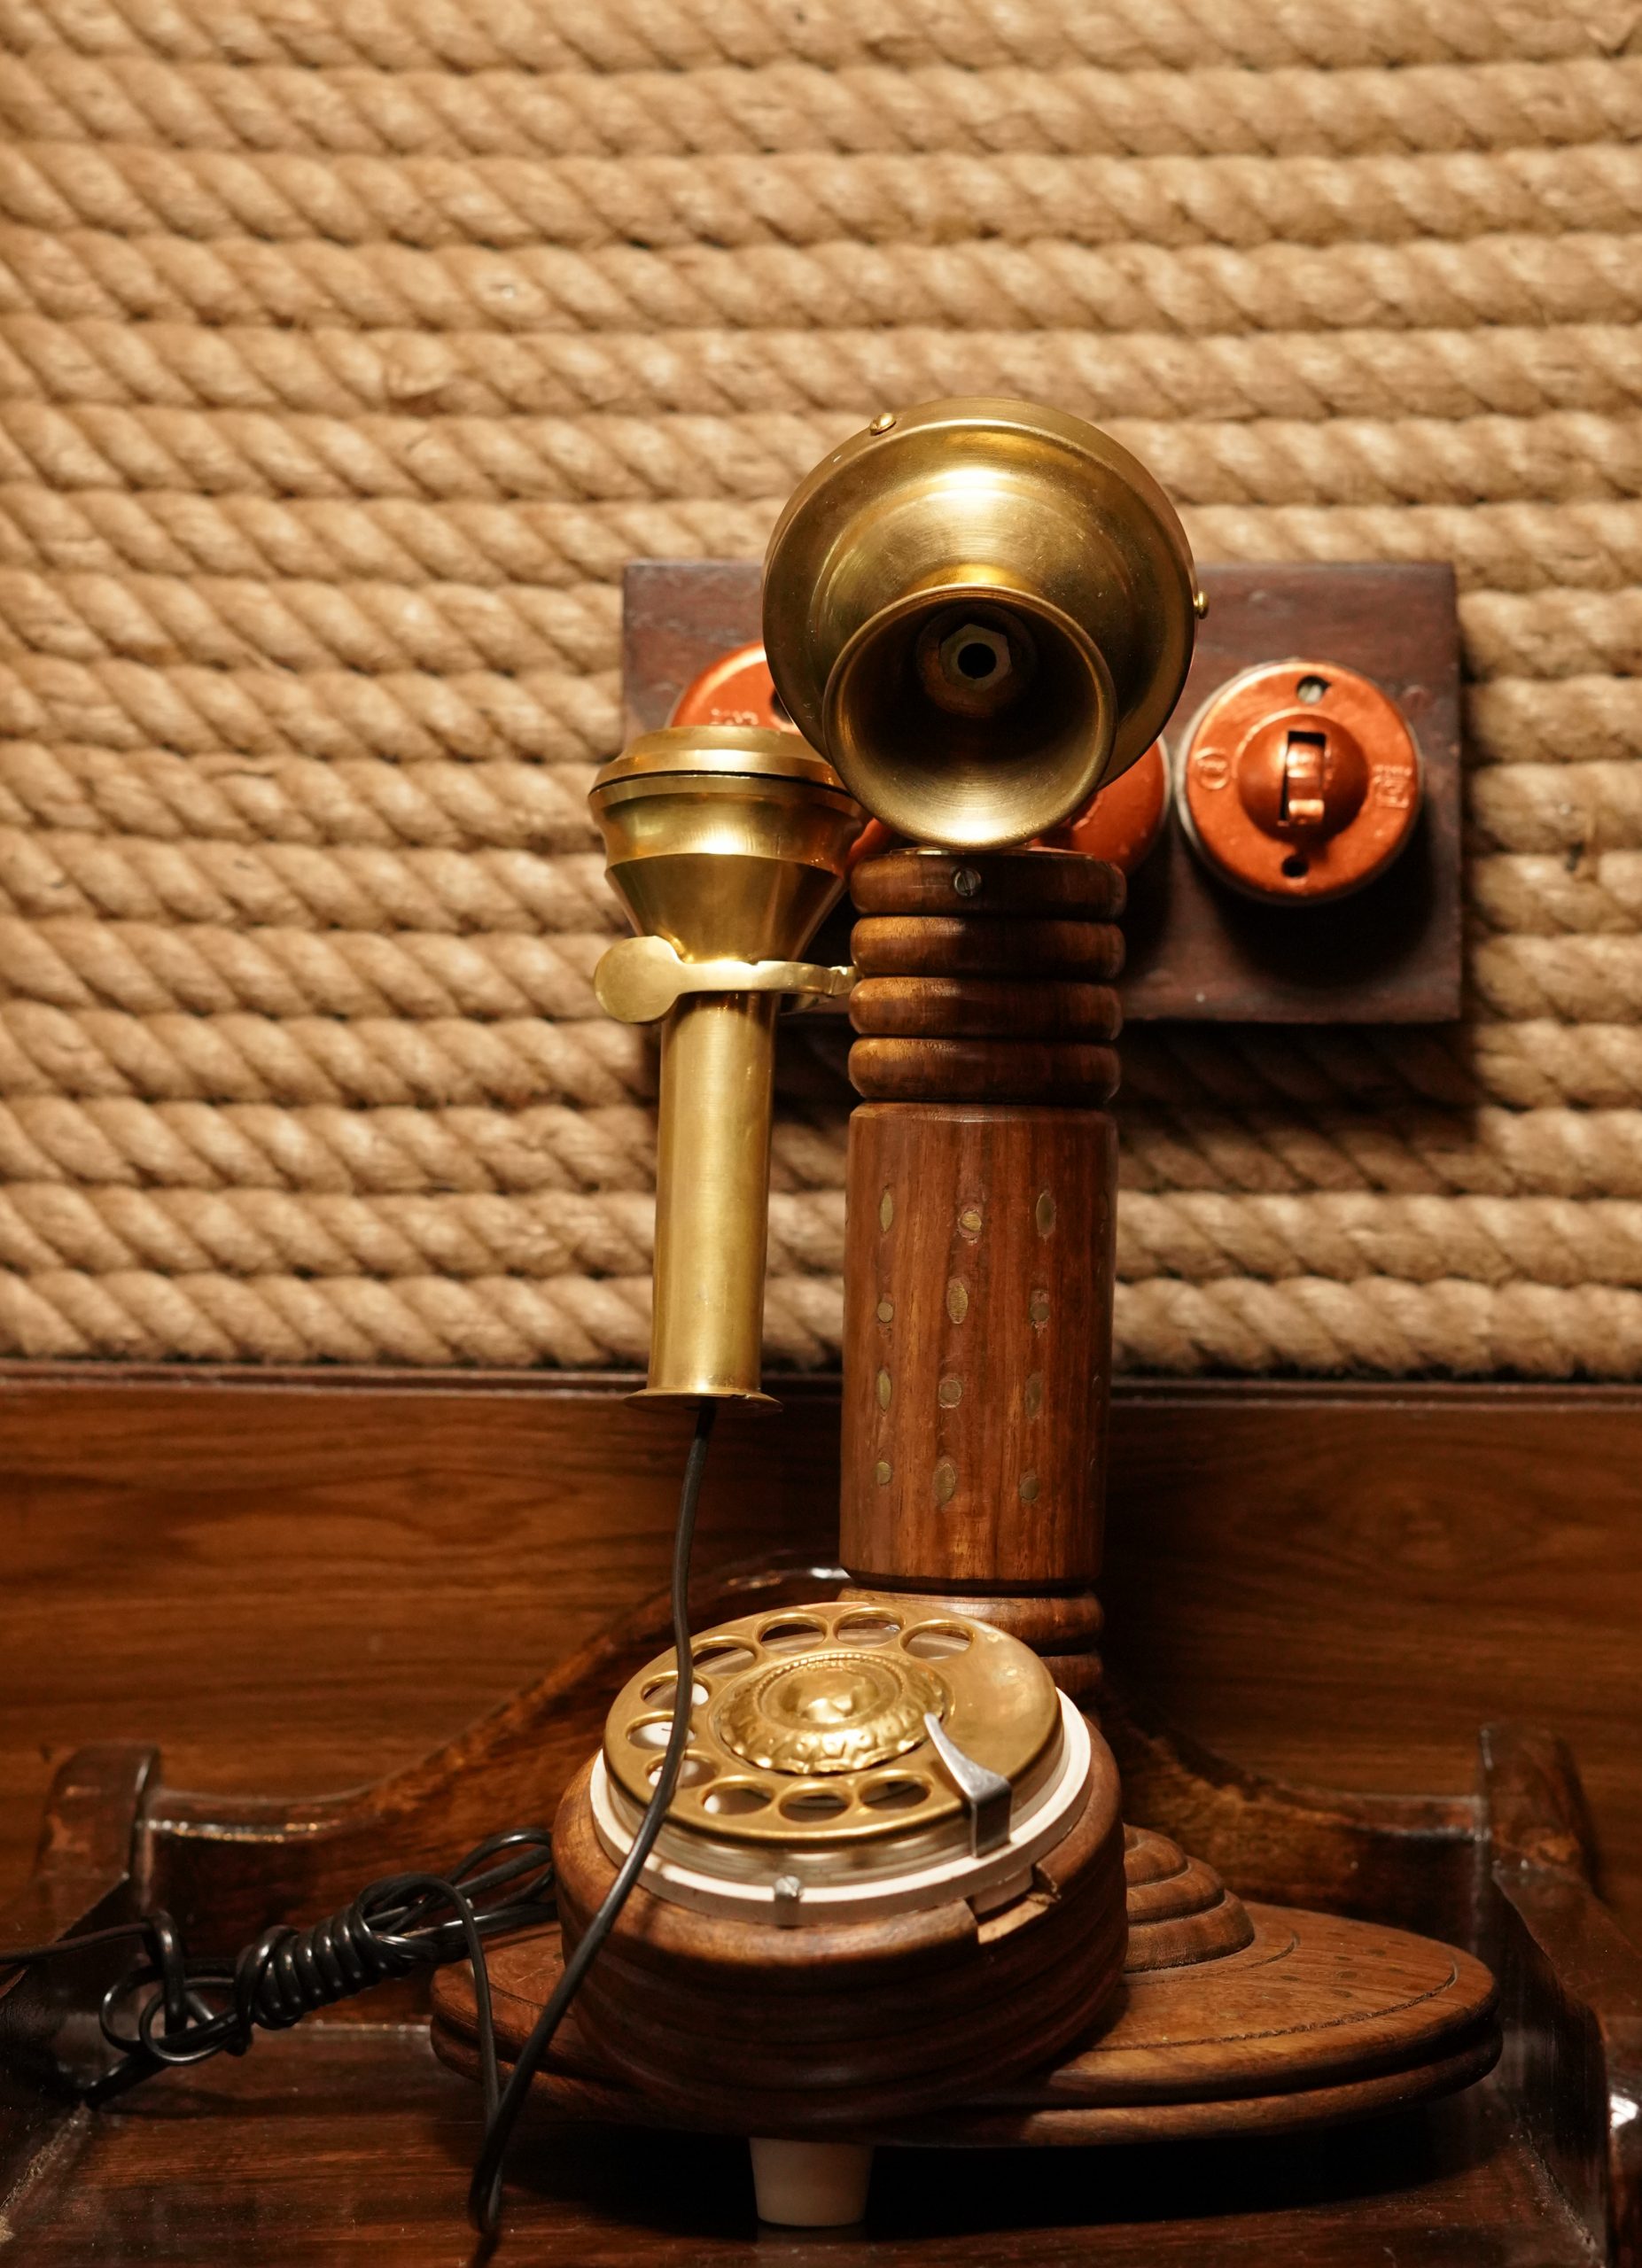 An old vintage telephone